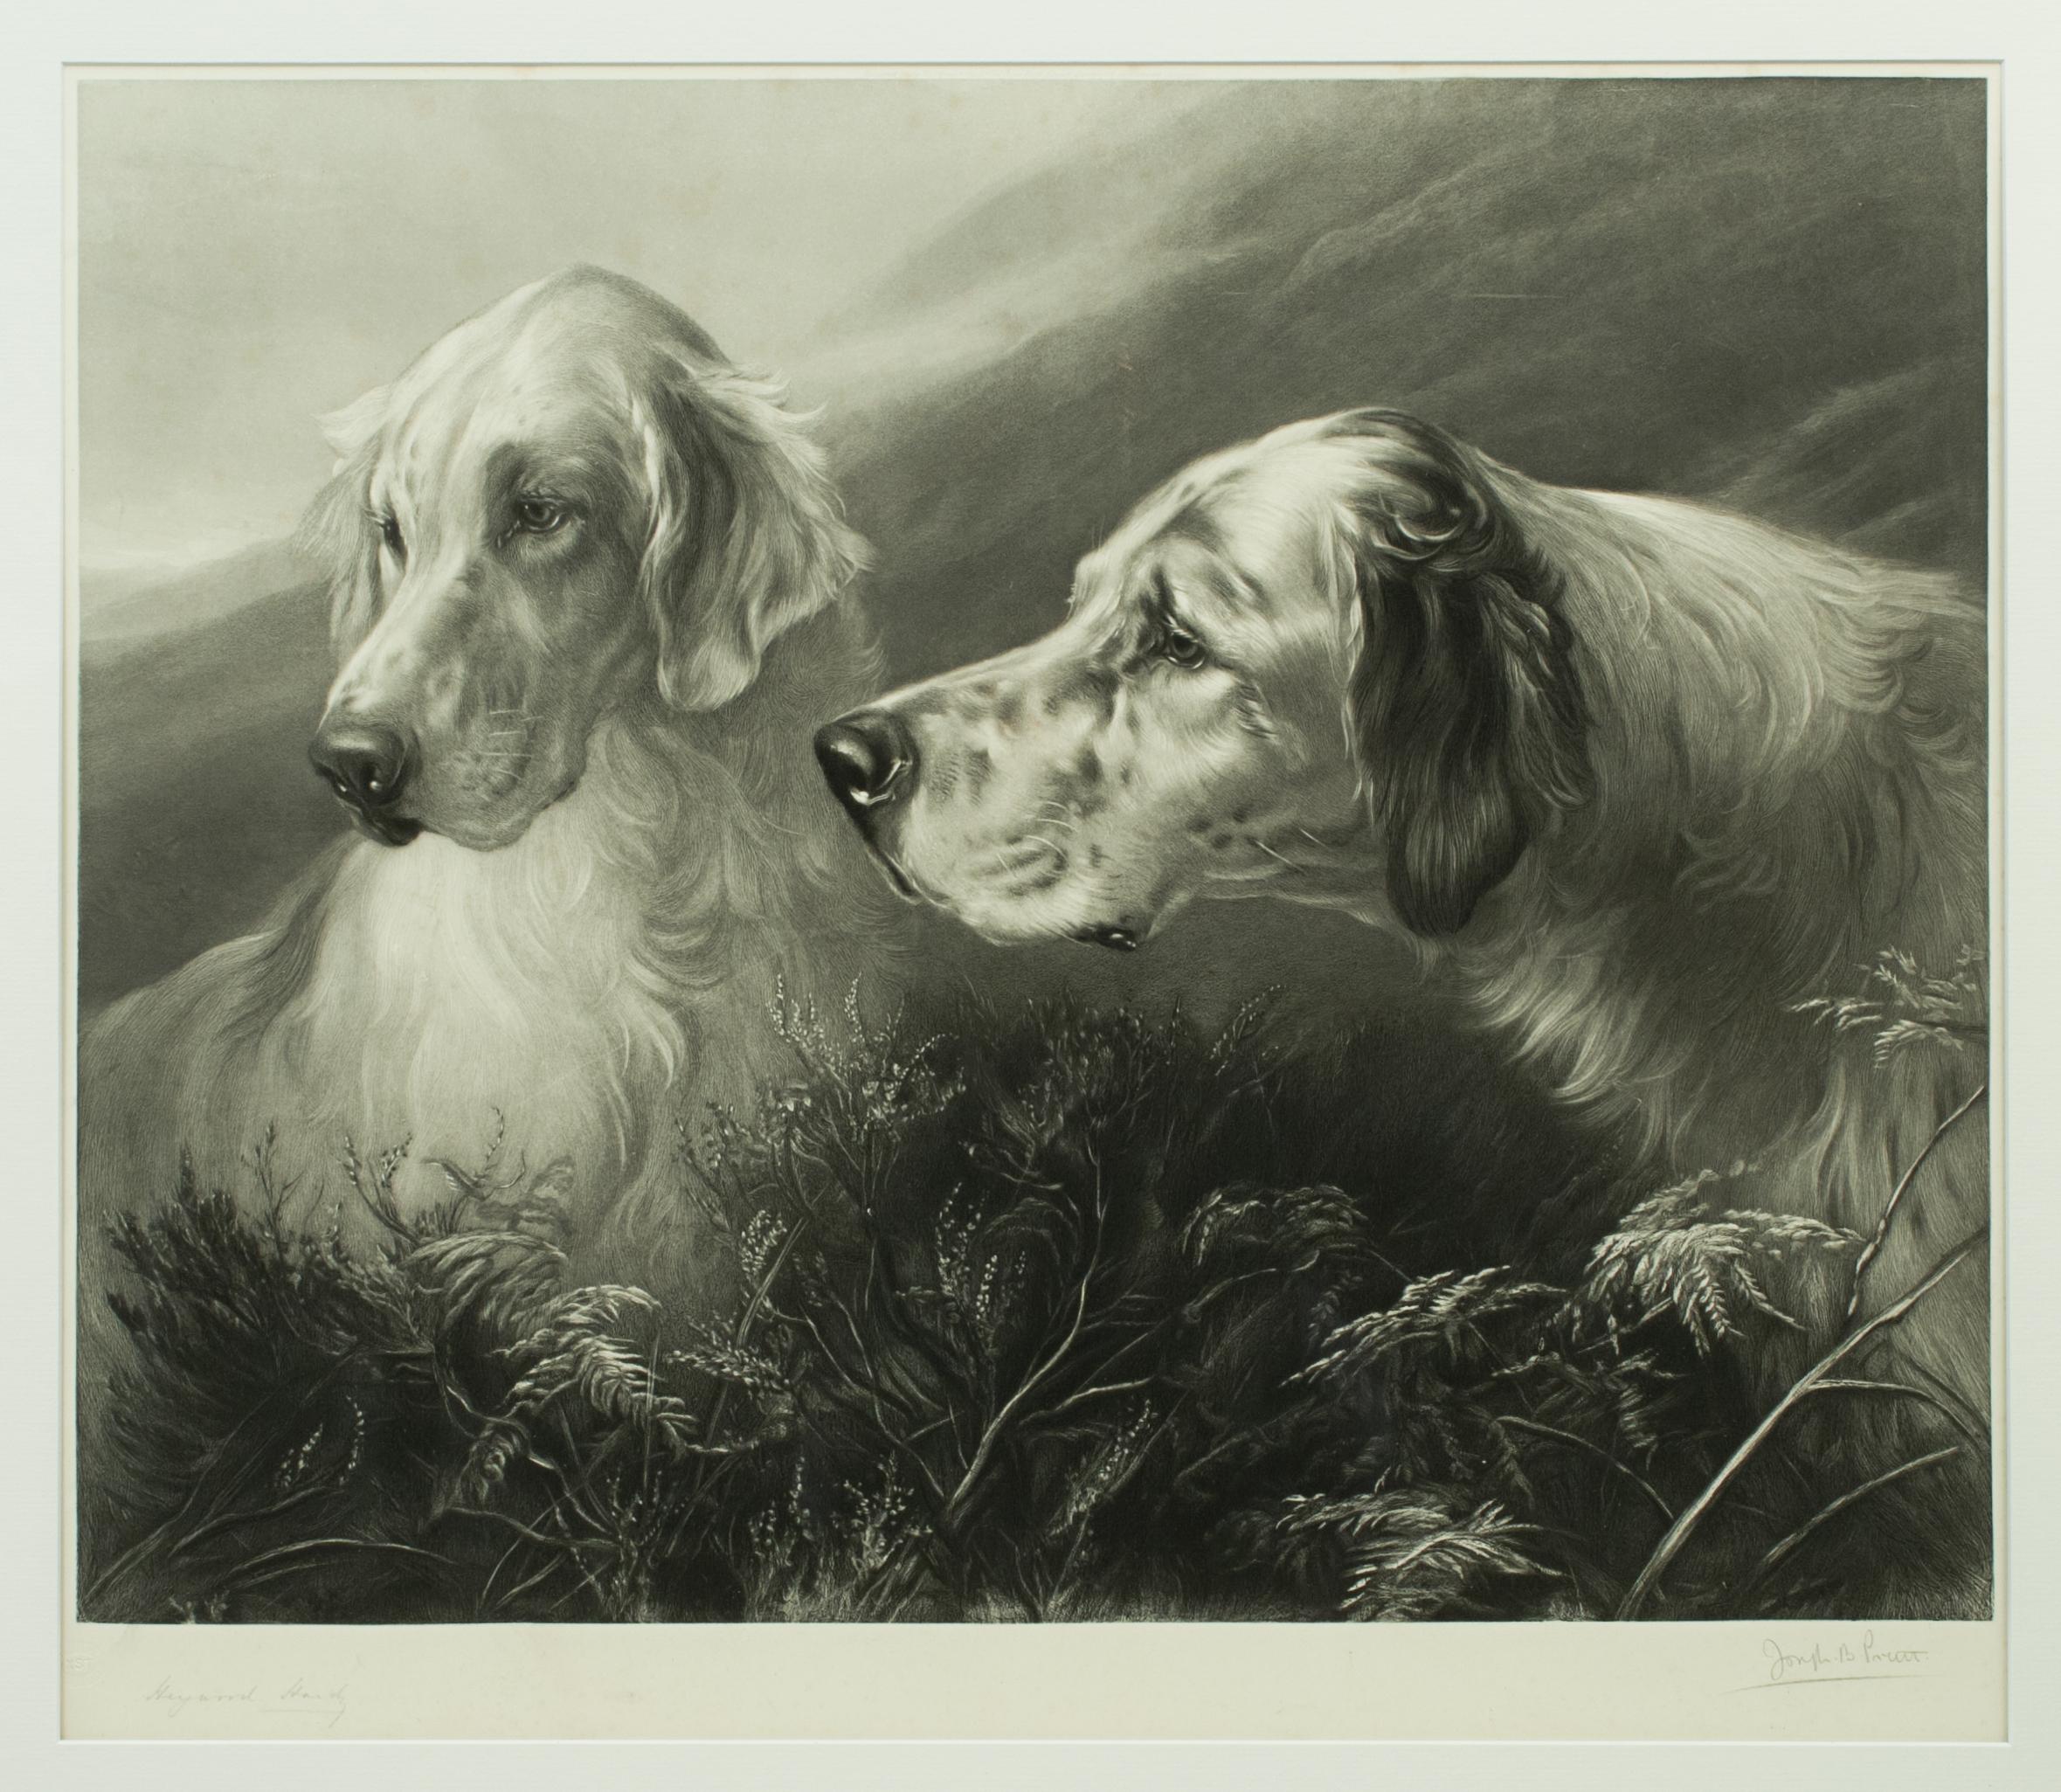 Sporting Art Shooting Dog Engraving, Setters at Work by Heywood Hardy